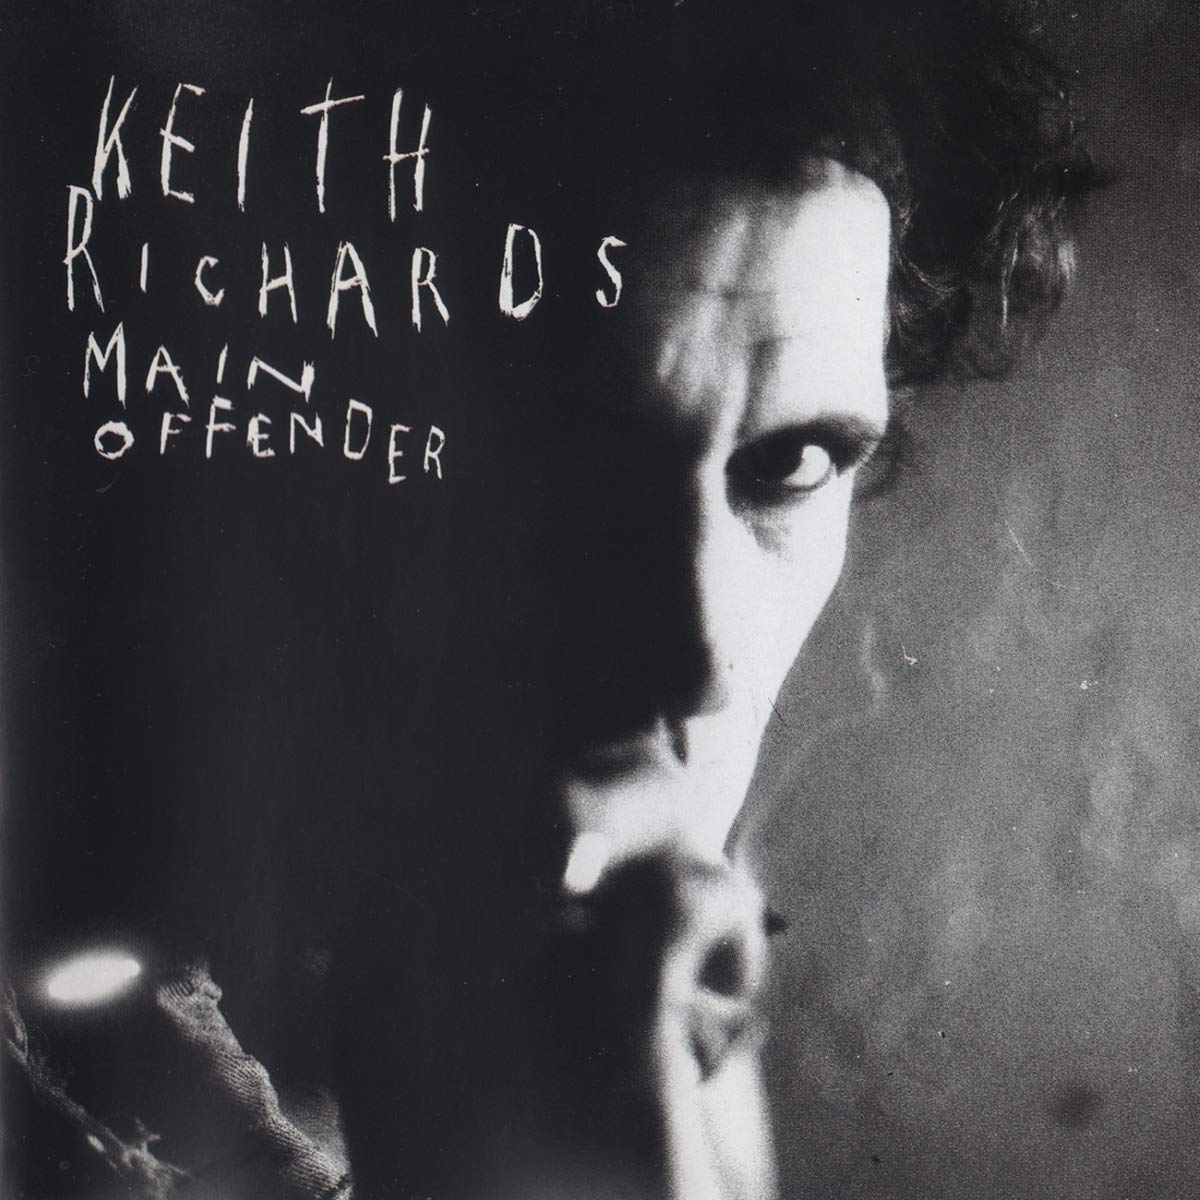 Keith Richards - Main Offender - LP